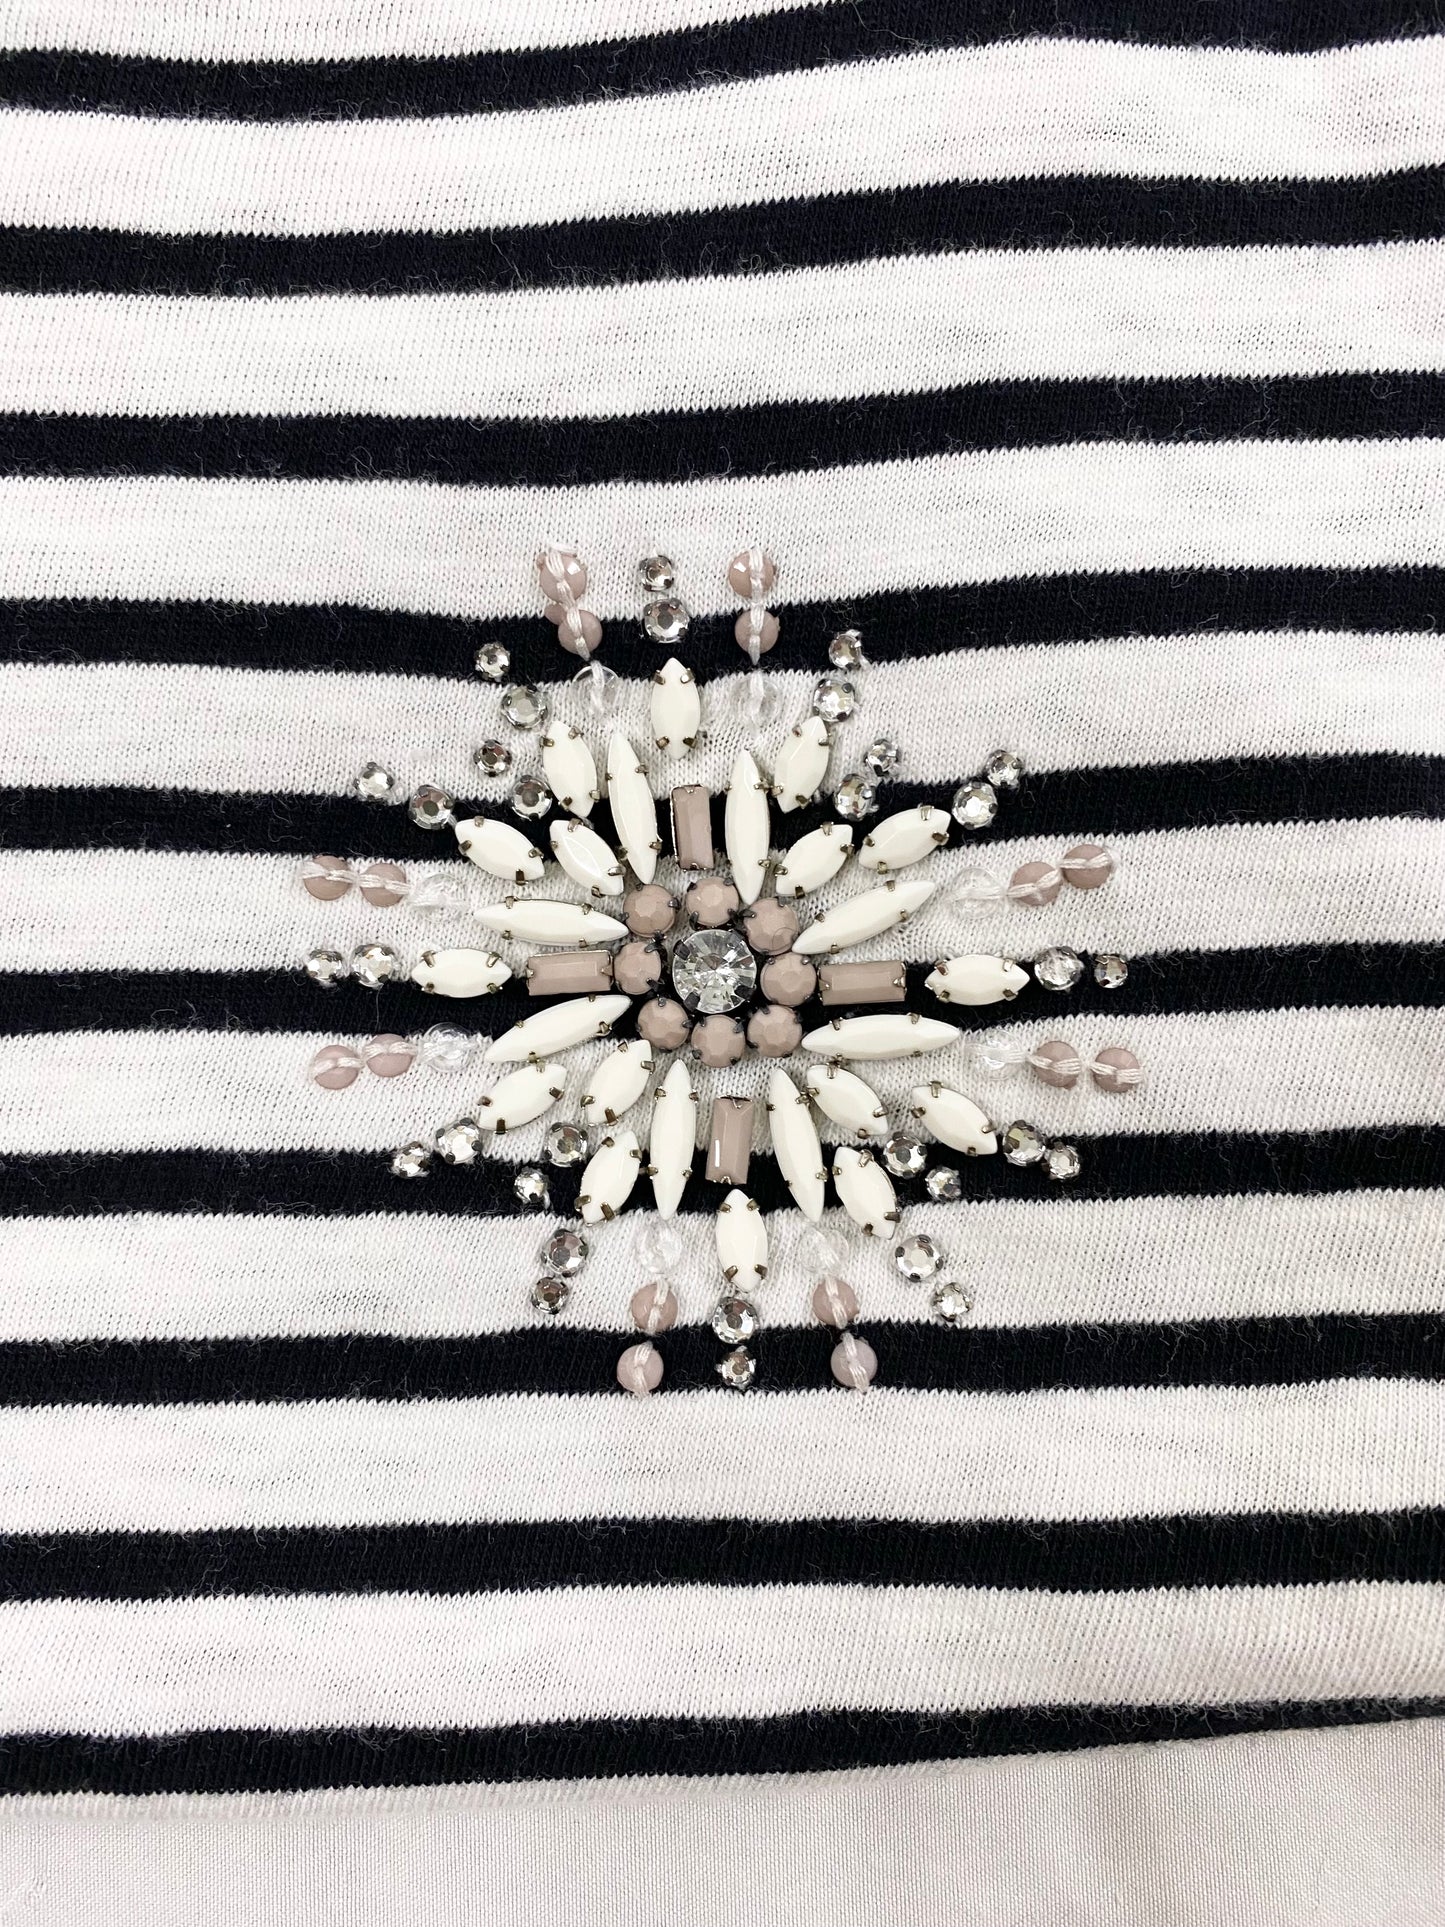 J.CREW Top, Black and White, Beading on Chest, Size M, SKU 000363-13